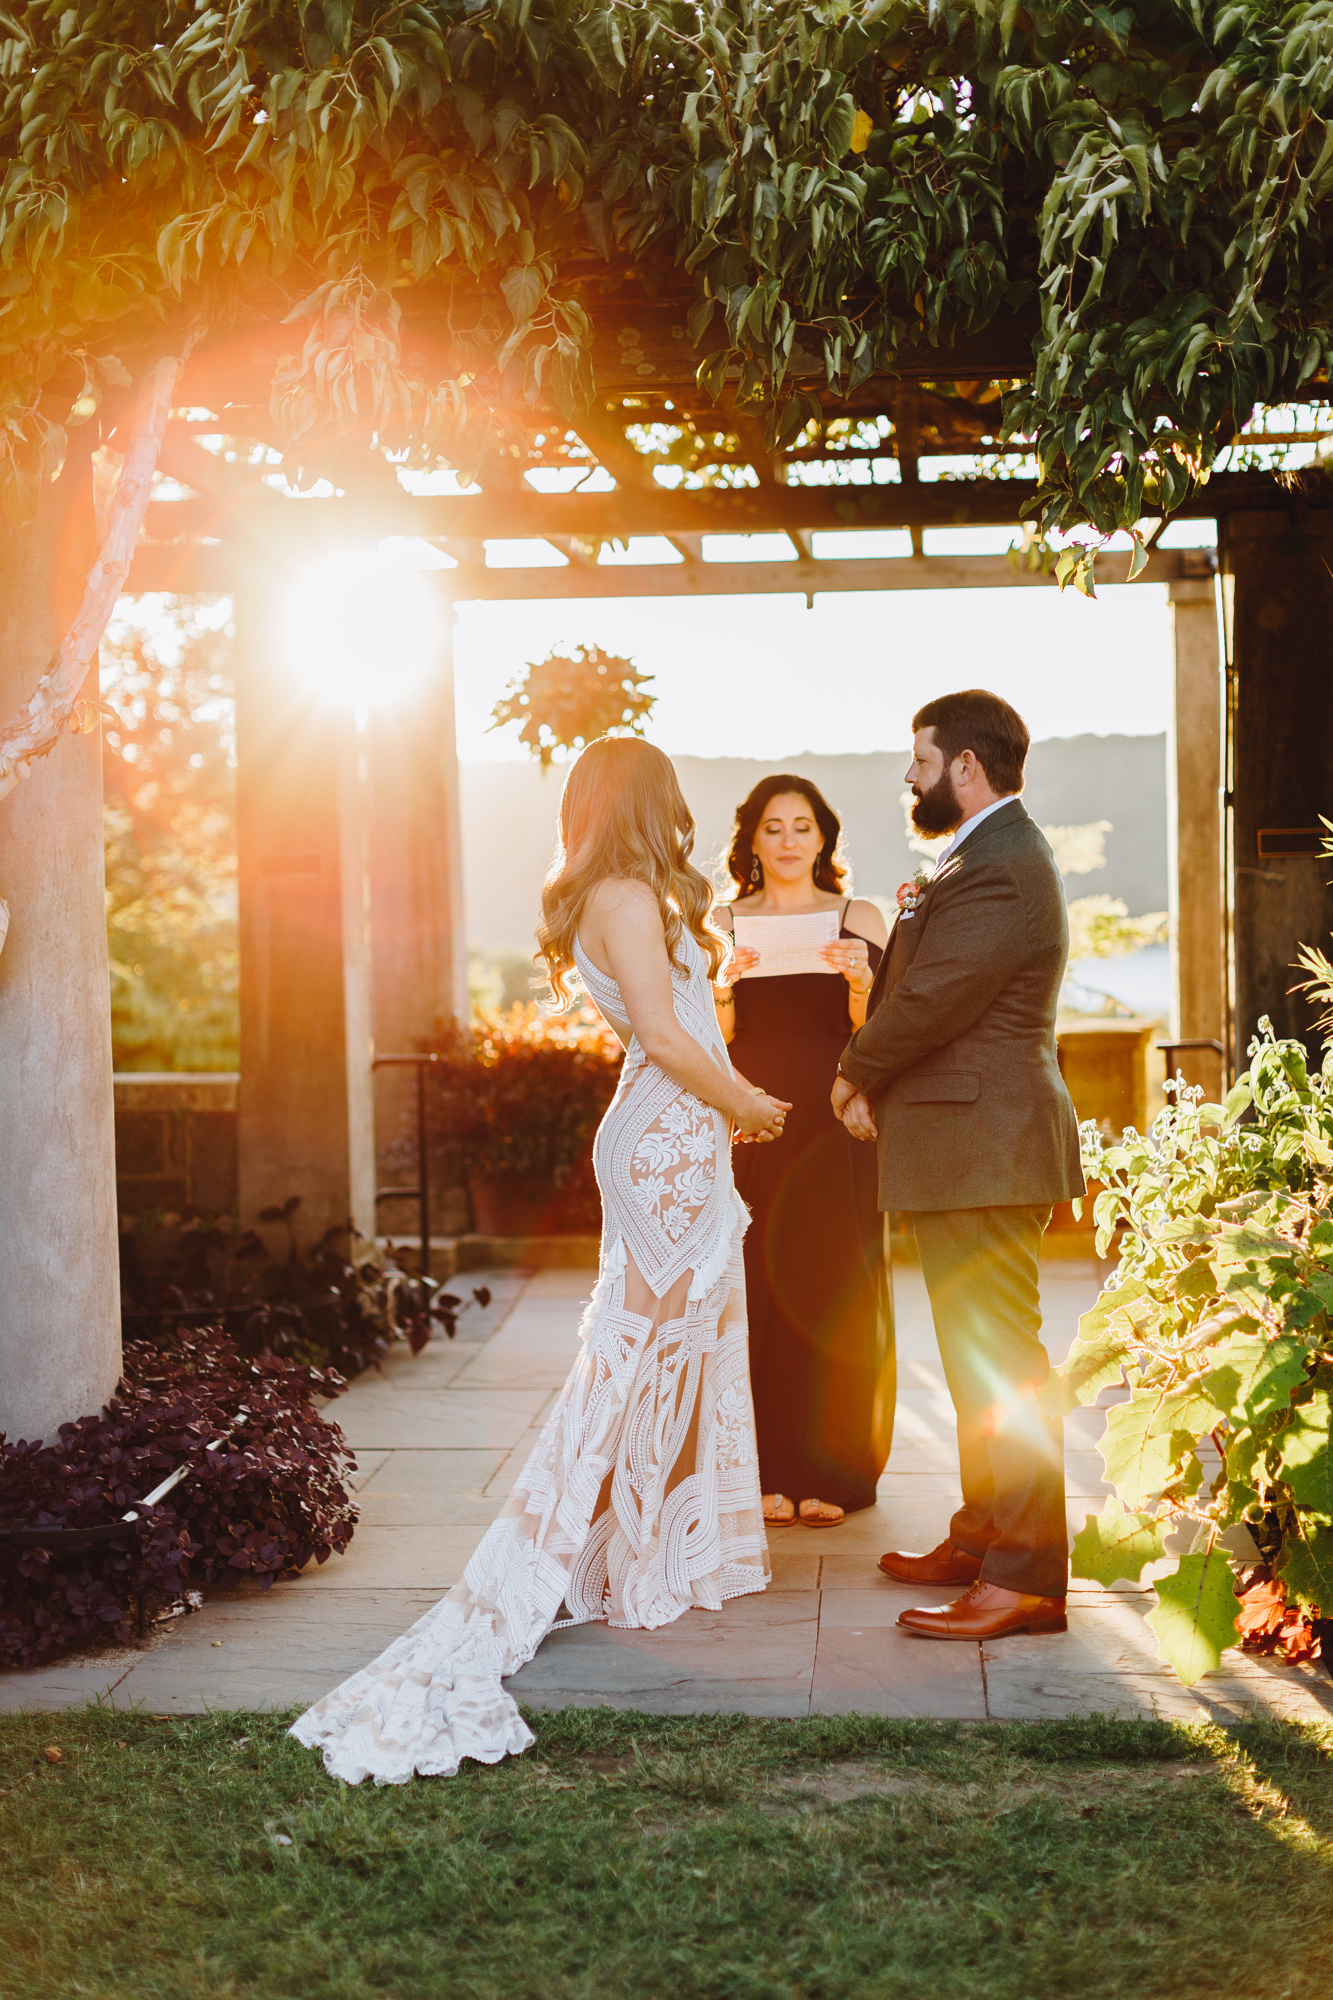 Golden hour wedding ceremony at Wave Hill in NYC